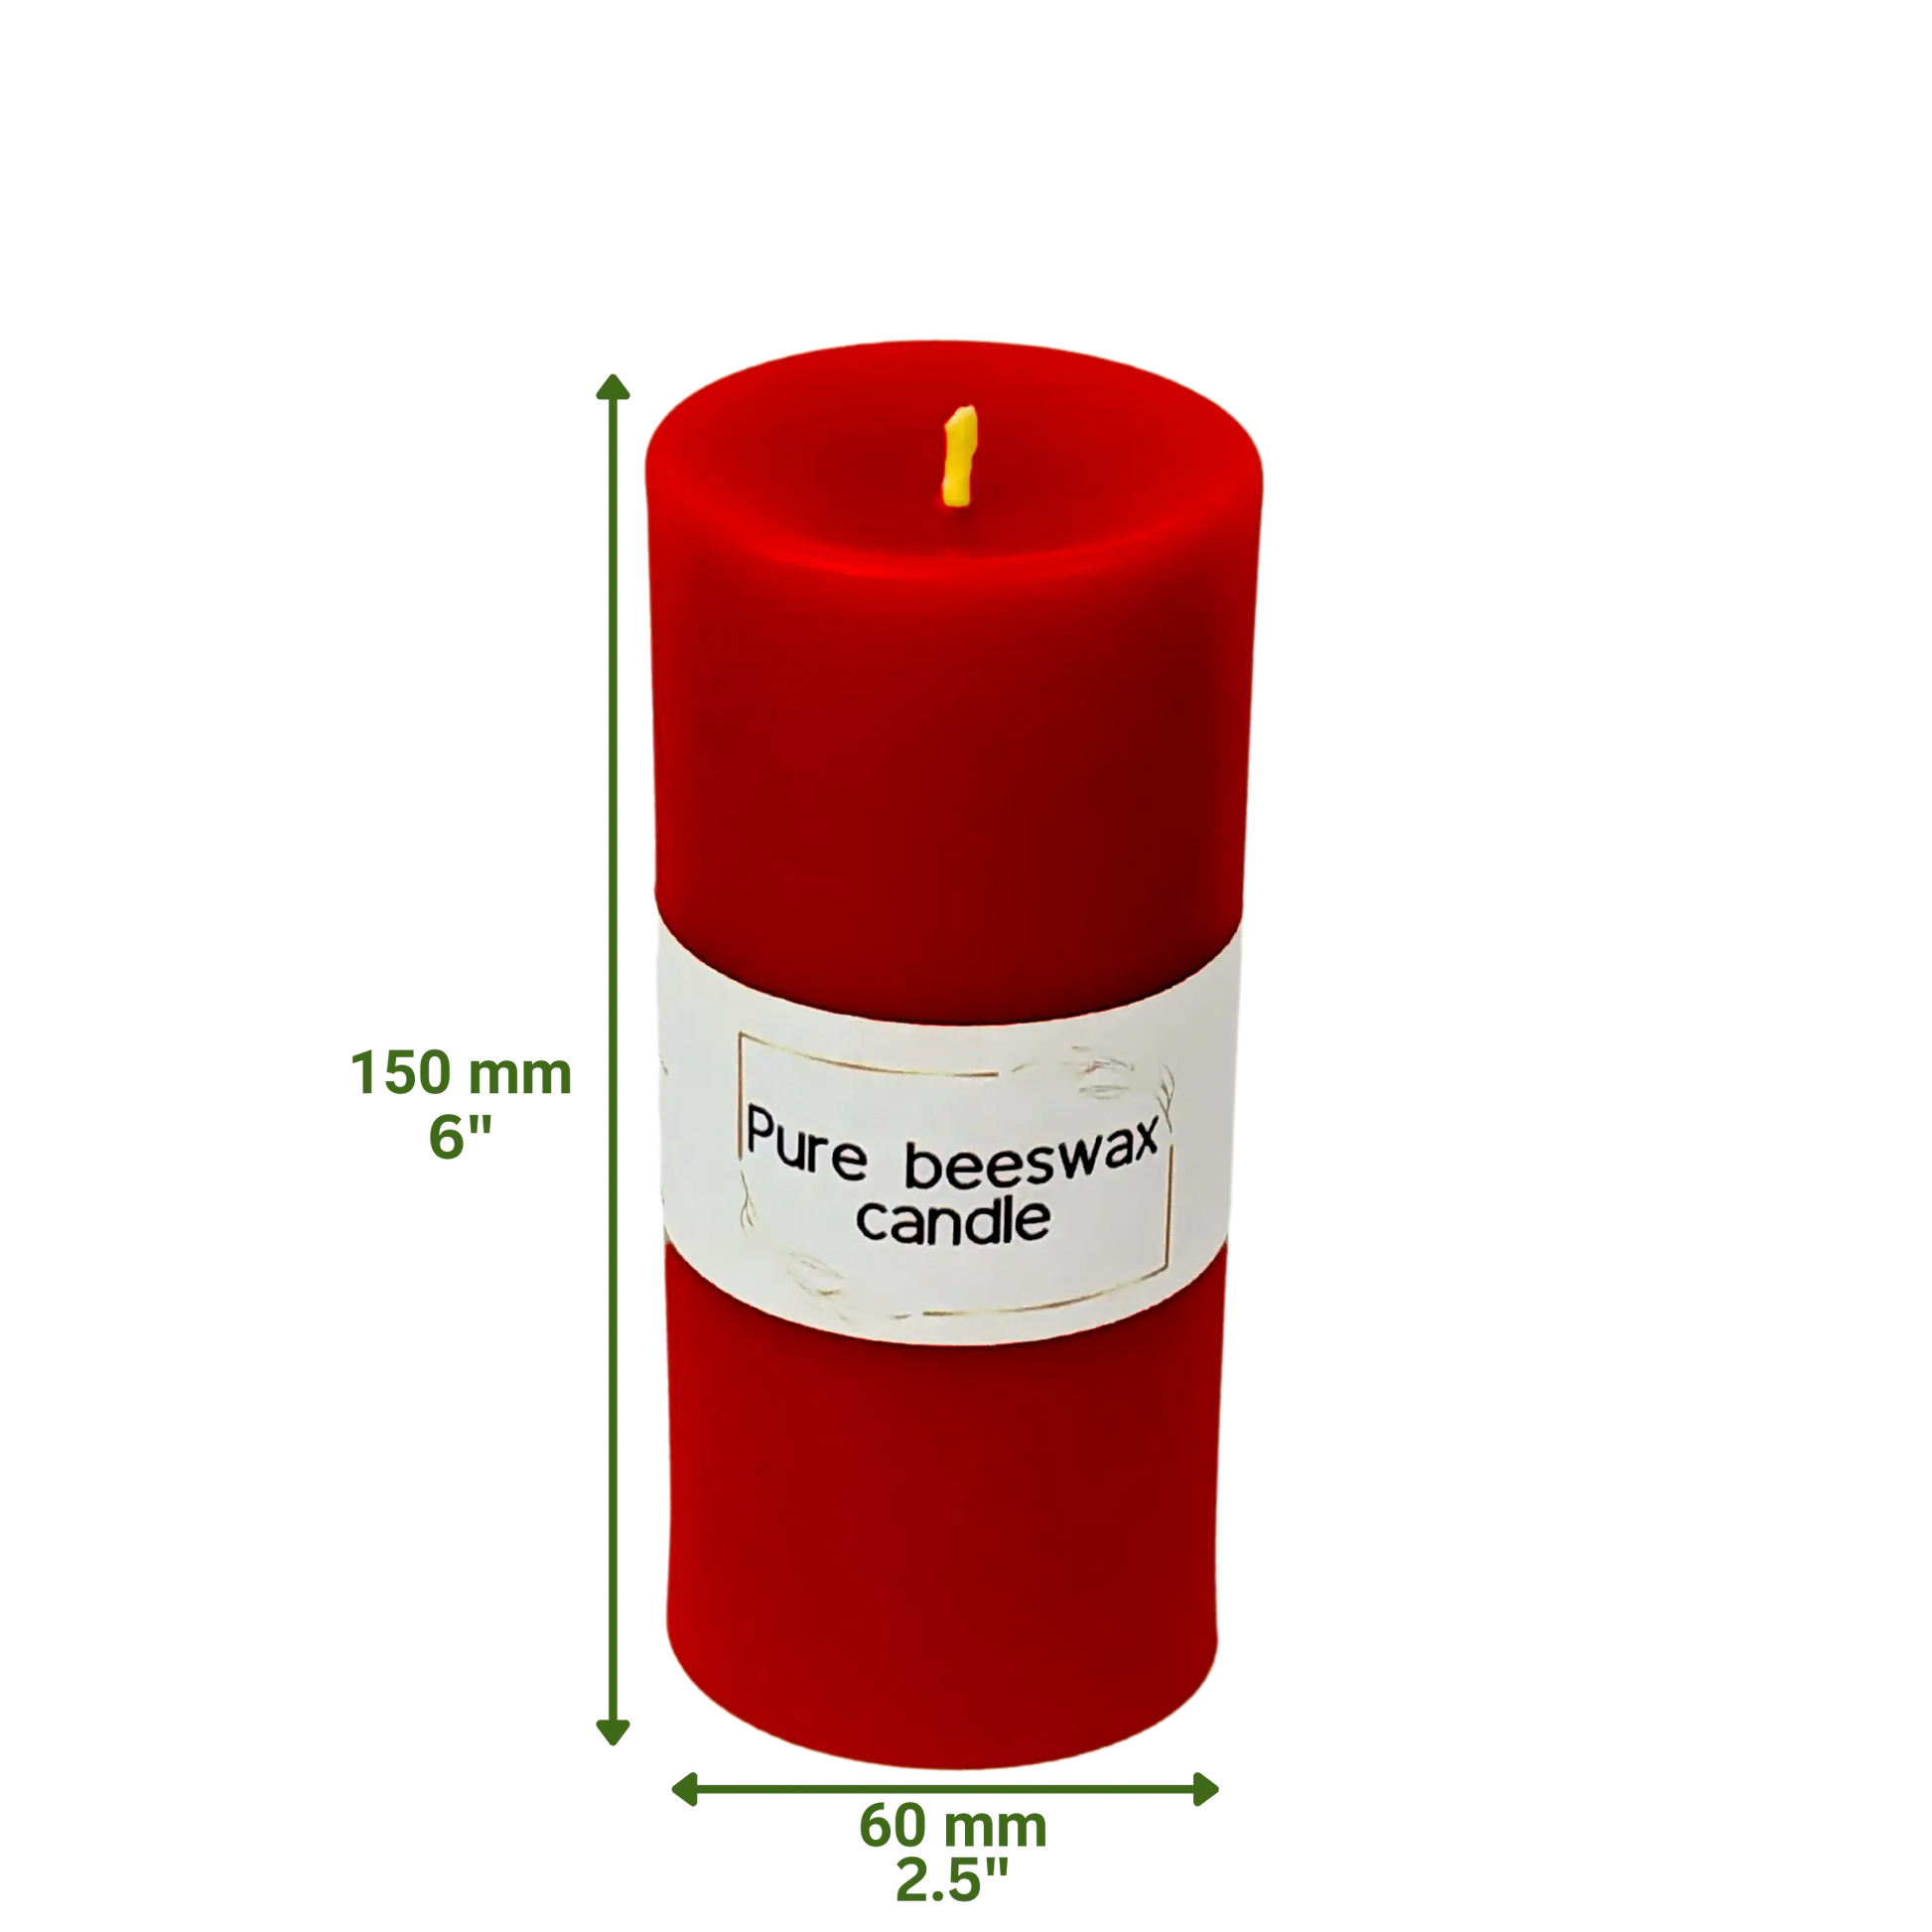 Non-toxic, hypoallergenic pure wax red pillar candles for safe, warm home lighting.